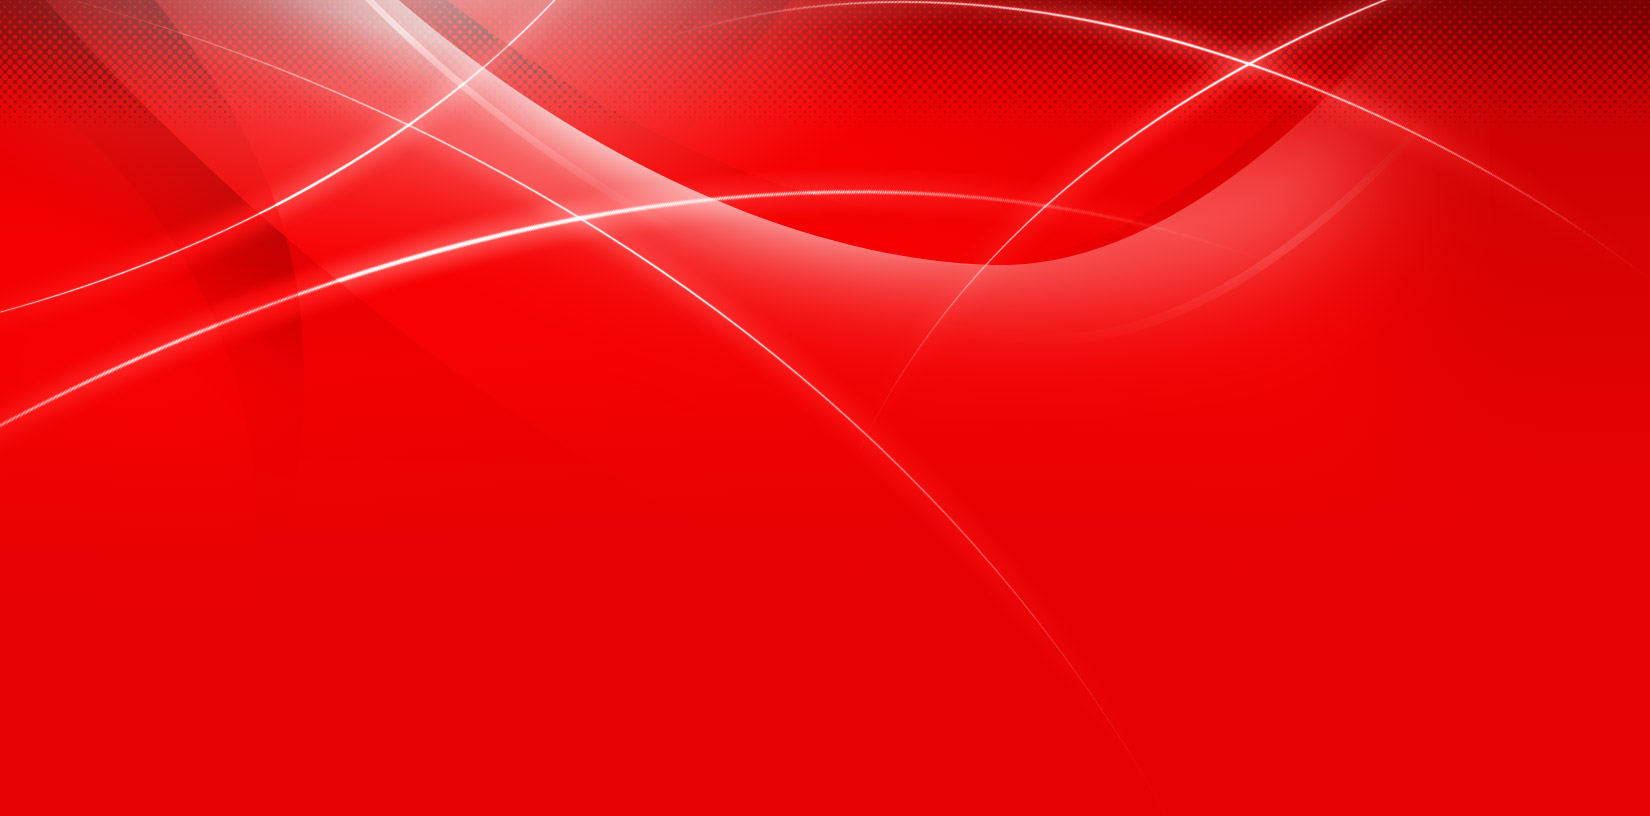 Latest Red Background Hd - 1650x816 Wallpaper 